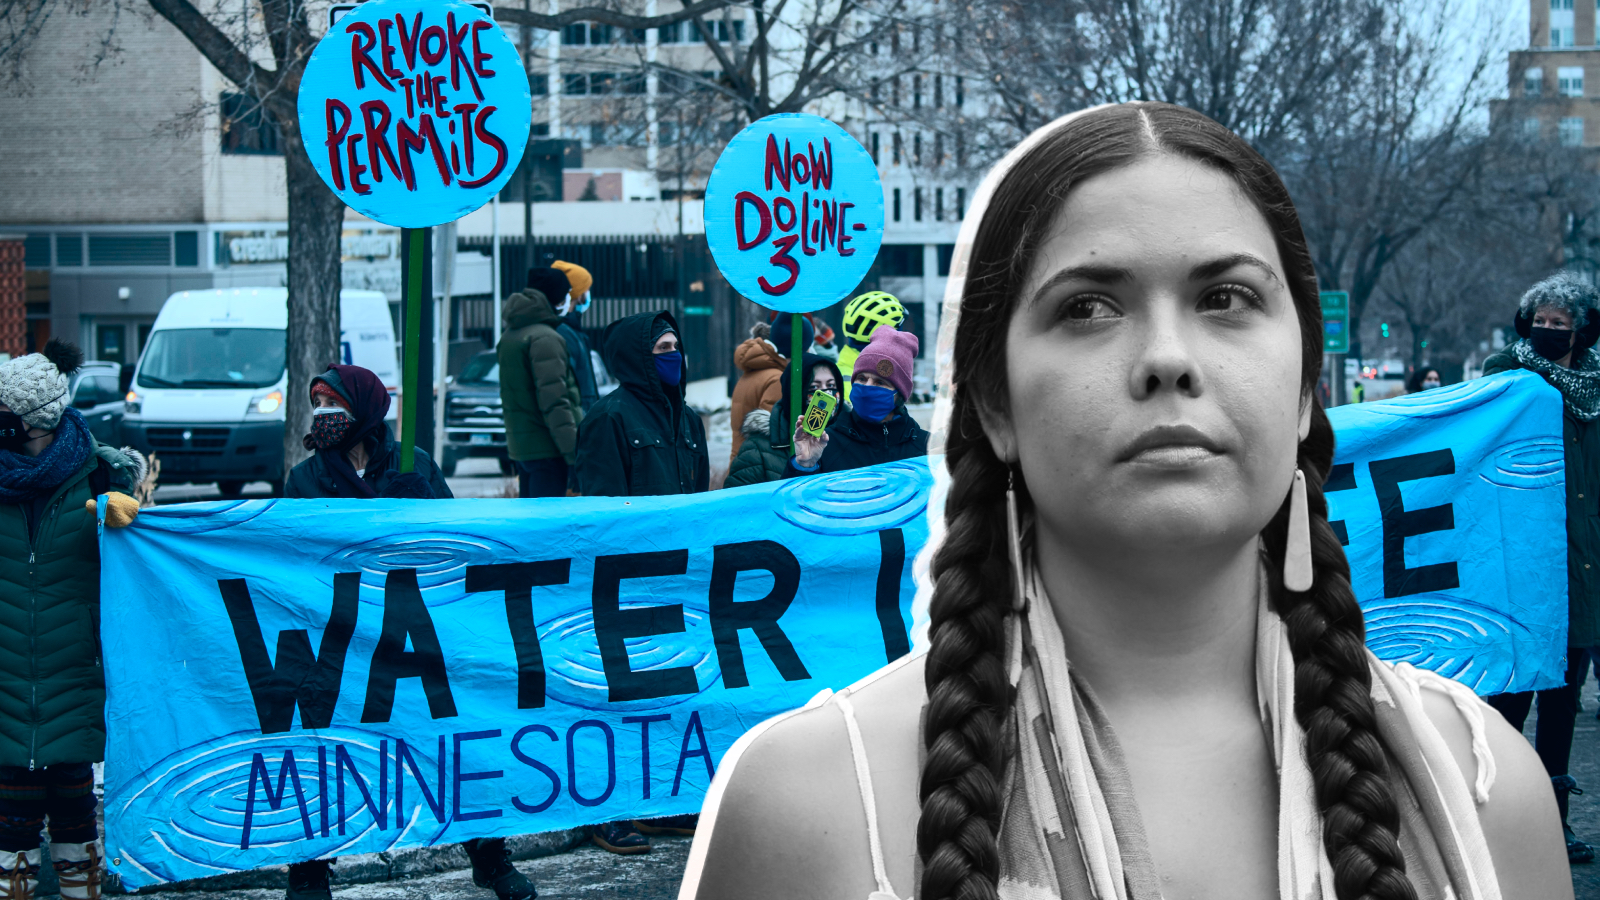 Indigenous attorney Tara Houska stands against the Line 3 pipeline in Minnesota.